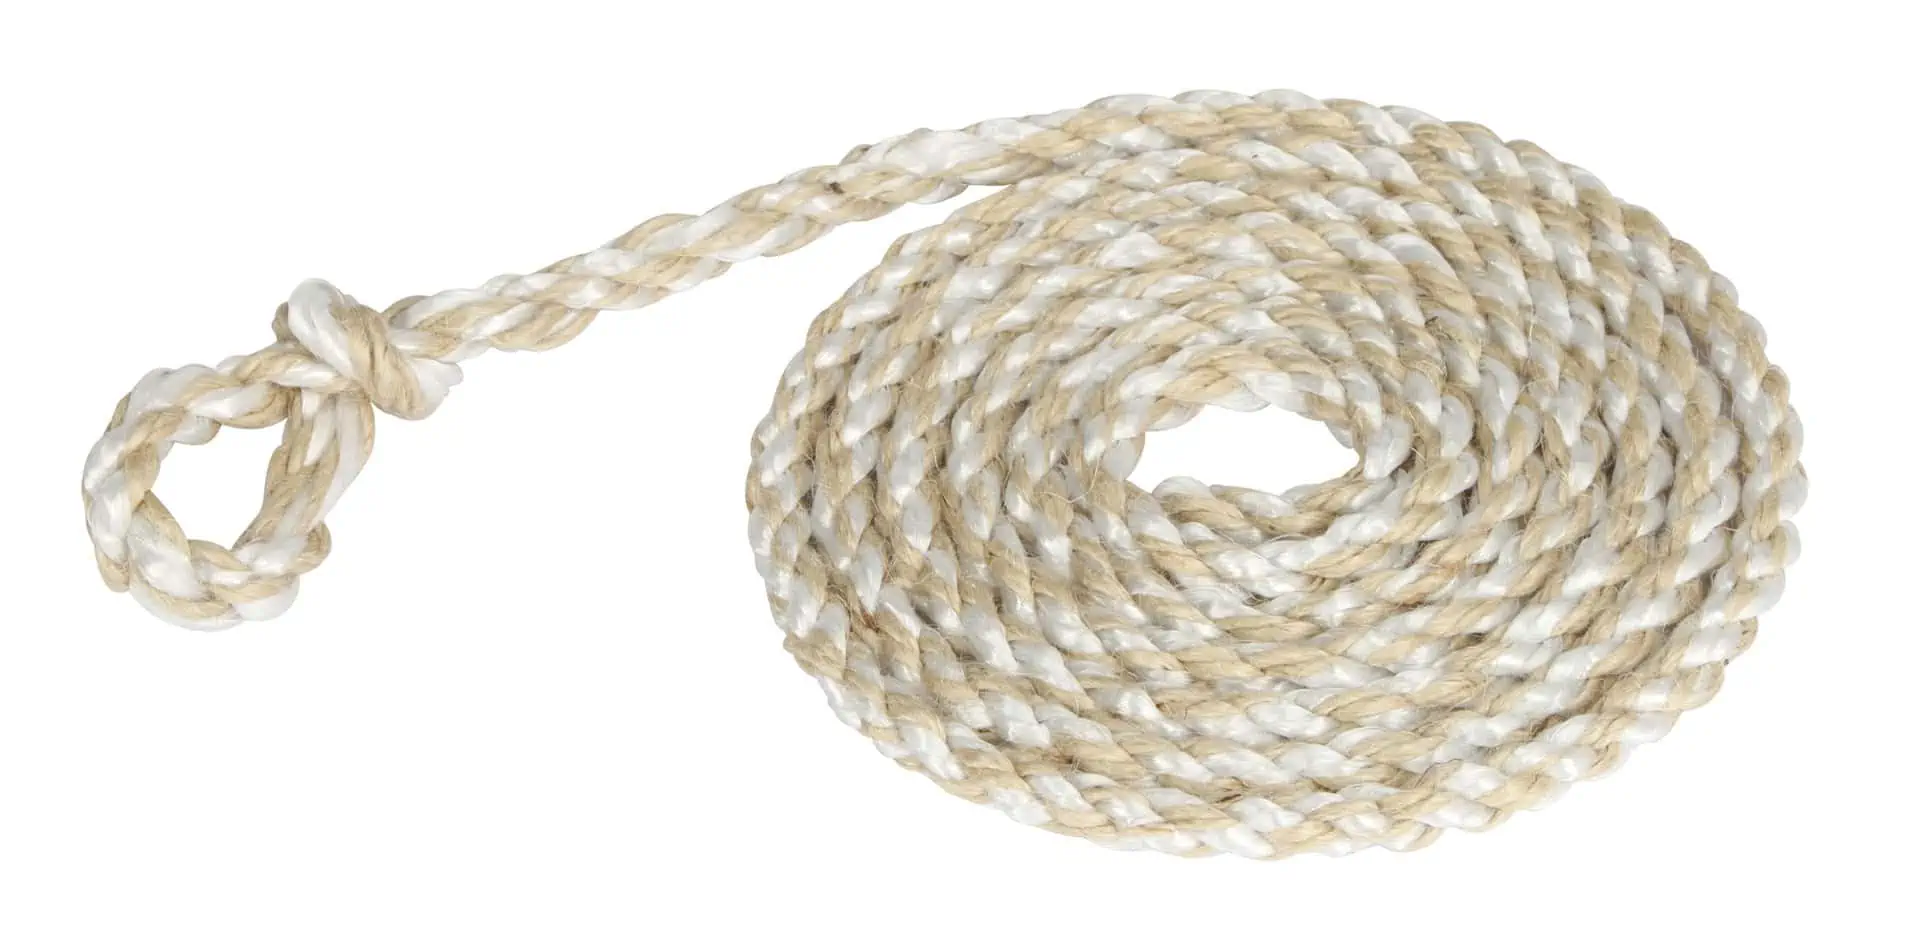 Livestock transport rope with small loop, jute PP, 5pcs.